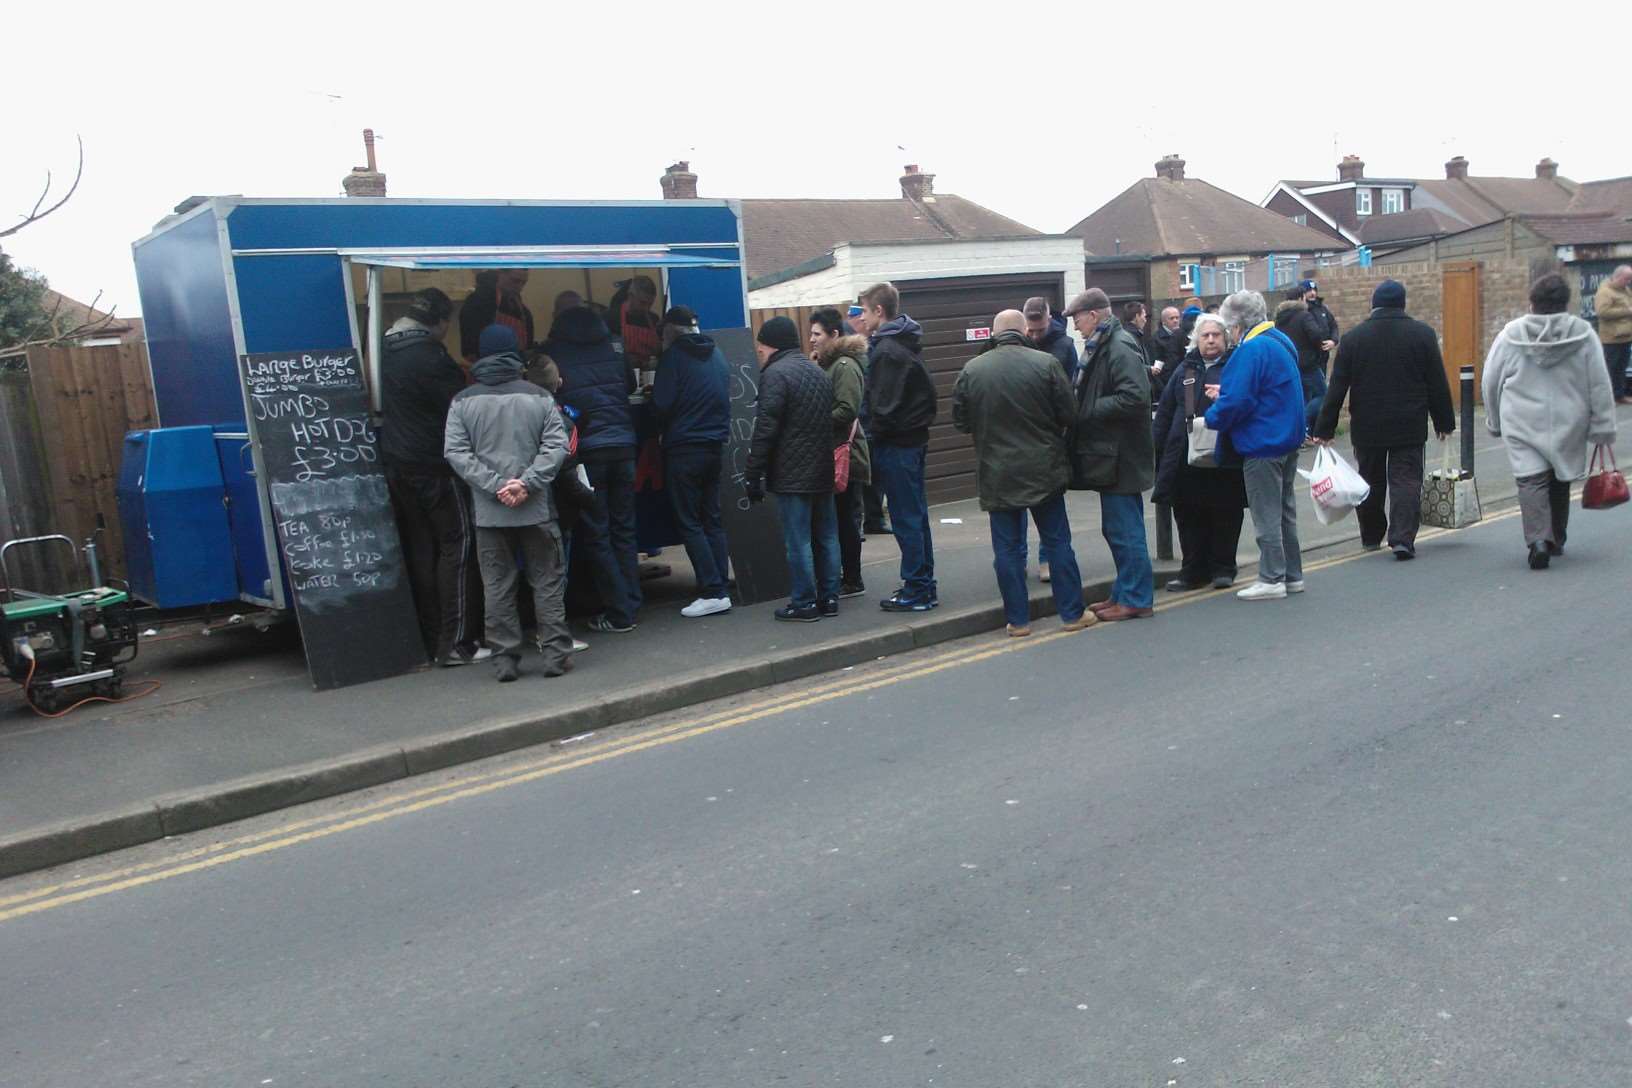 A burger van served food outside the stadium for yesterday's match, but grub was also available inside the stands